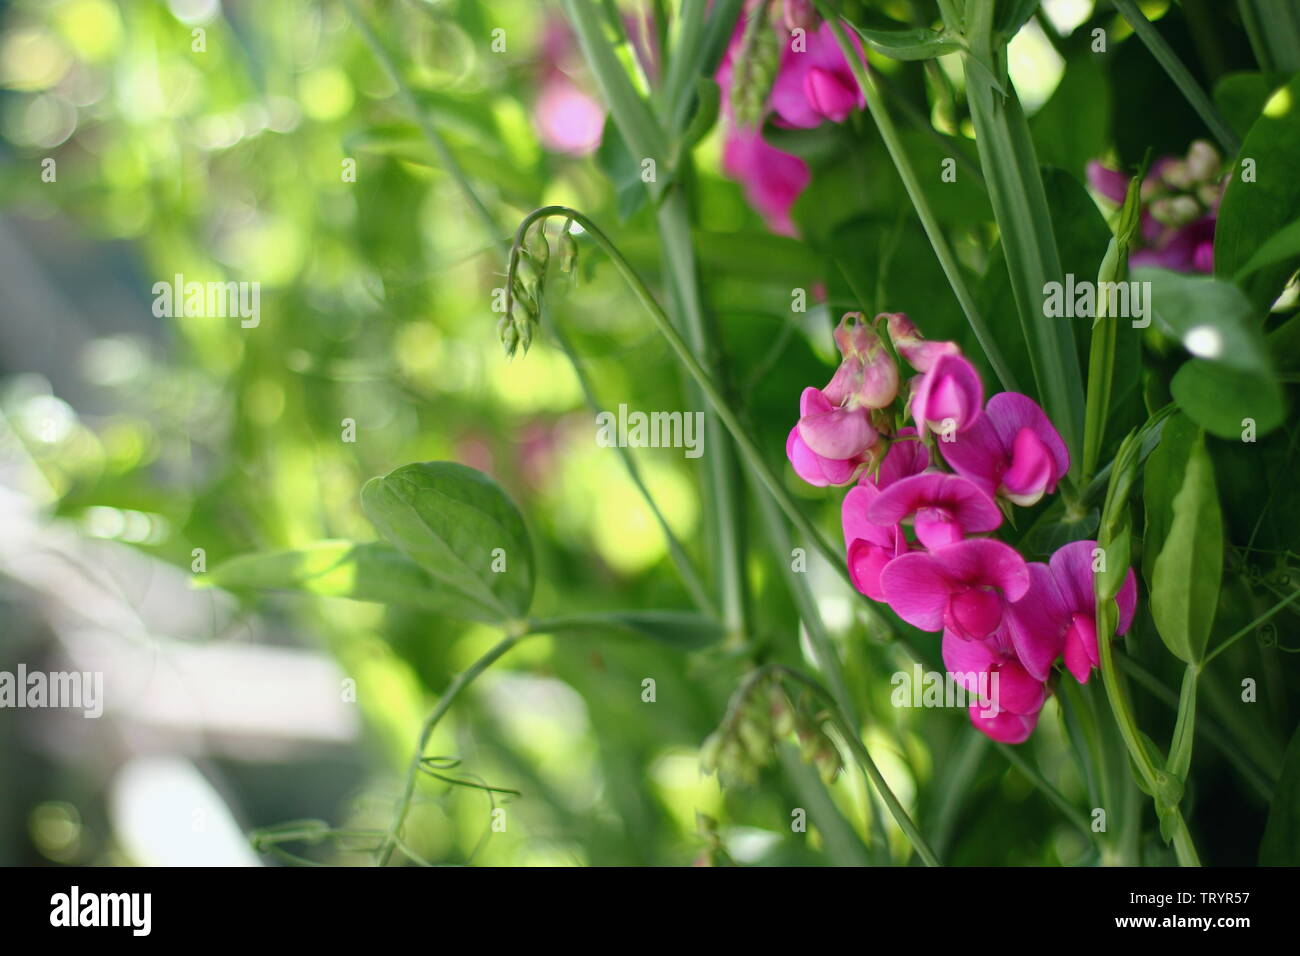 Sweet pea plant, lovely summer light in the blurred green background, Irish herb country garden, Galway, Ireland Stock Photo